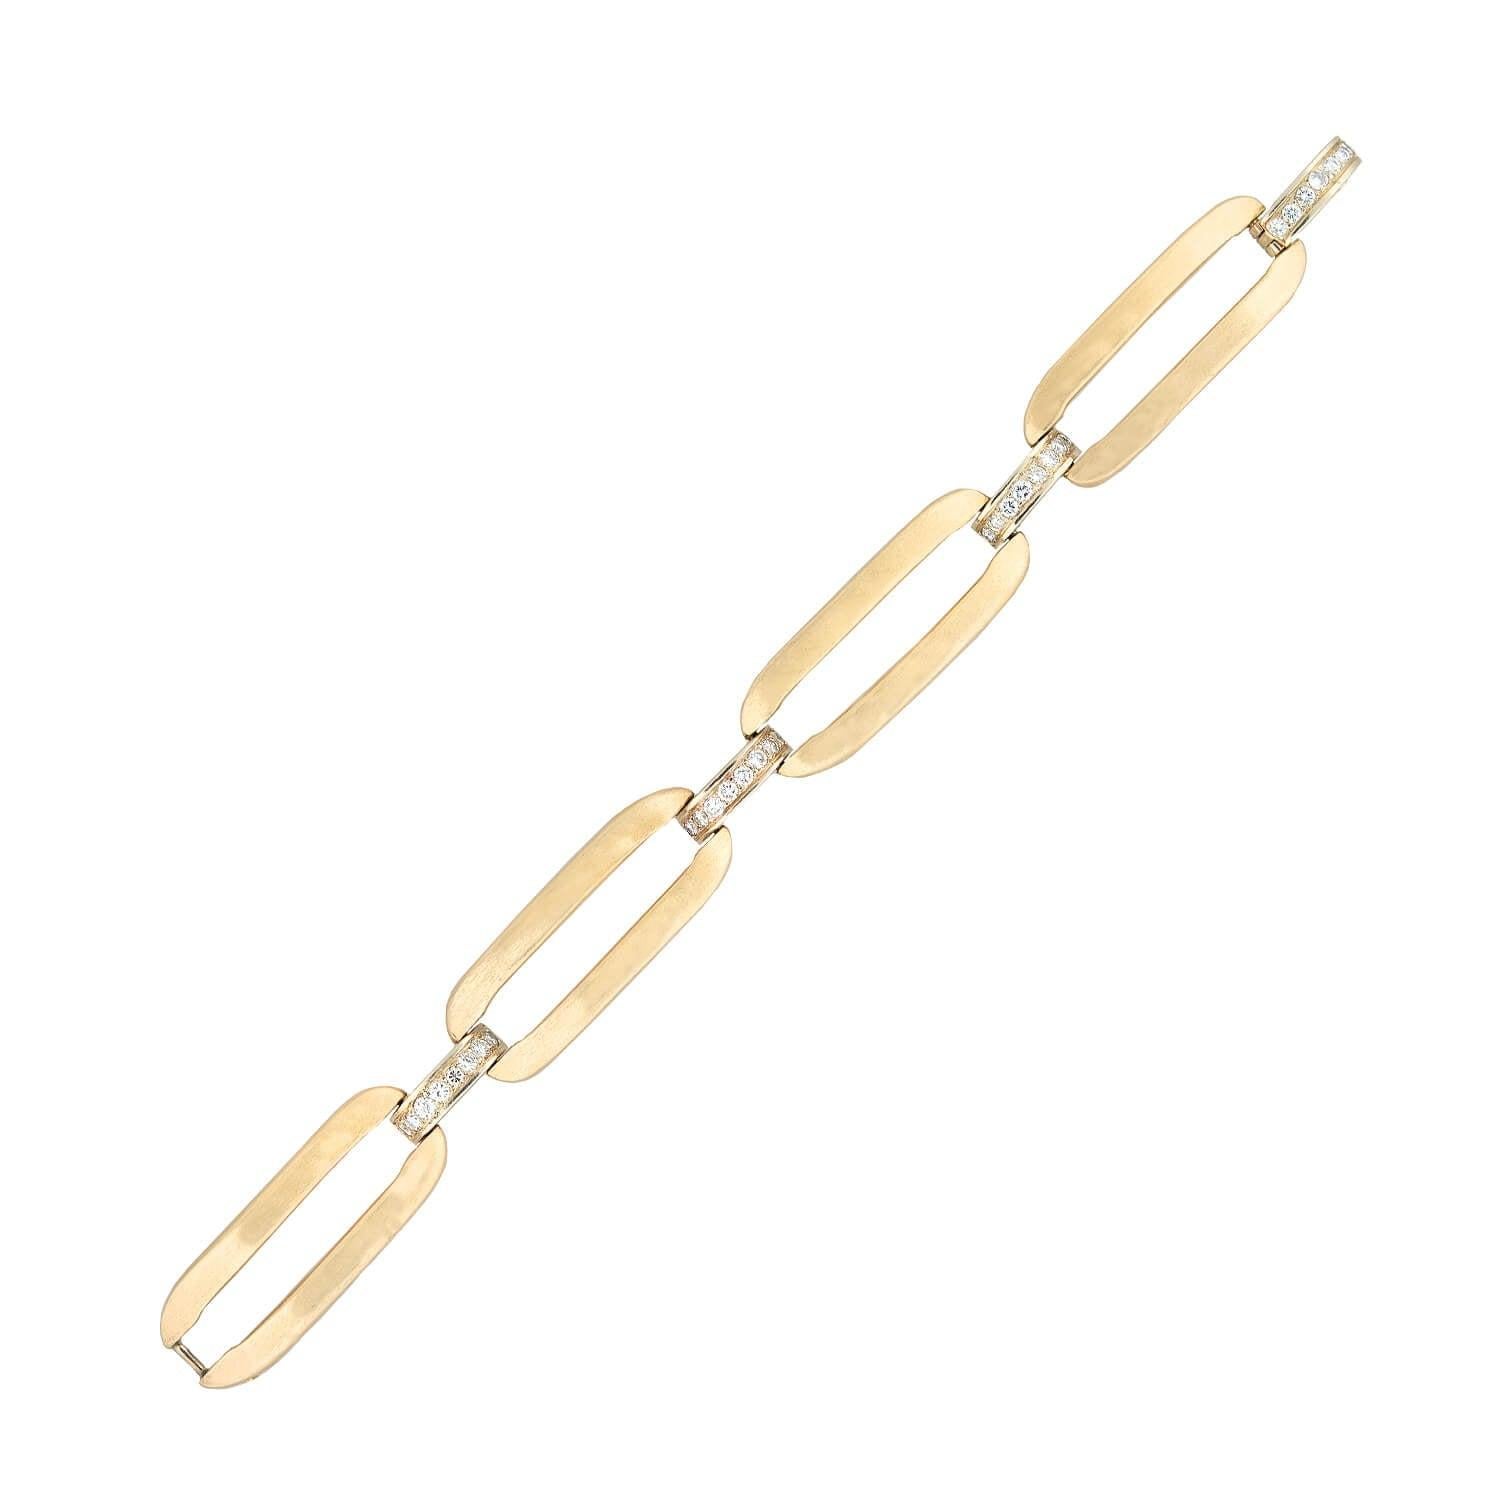 A beautiful contemporary link bracelet by Ivanka Trump Fine Jewelry! Crafted in 14kt yellow gold, this bracelet features four elongated links with a gently brushed texture. Four delicate links secure the golden links, three of which are set with